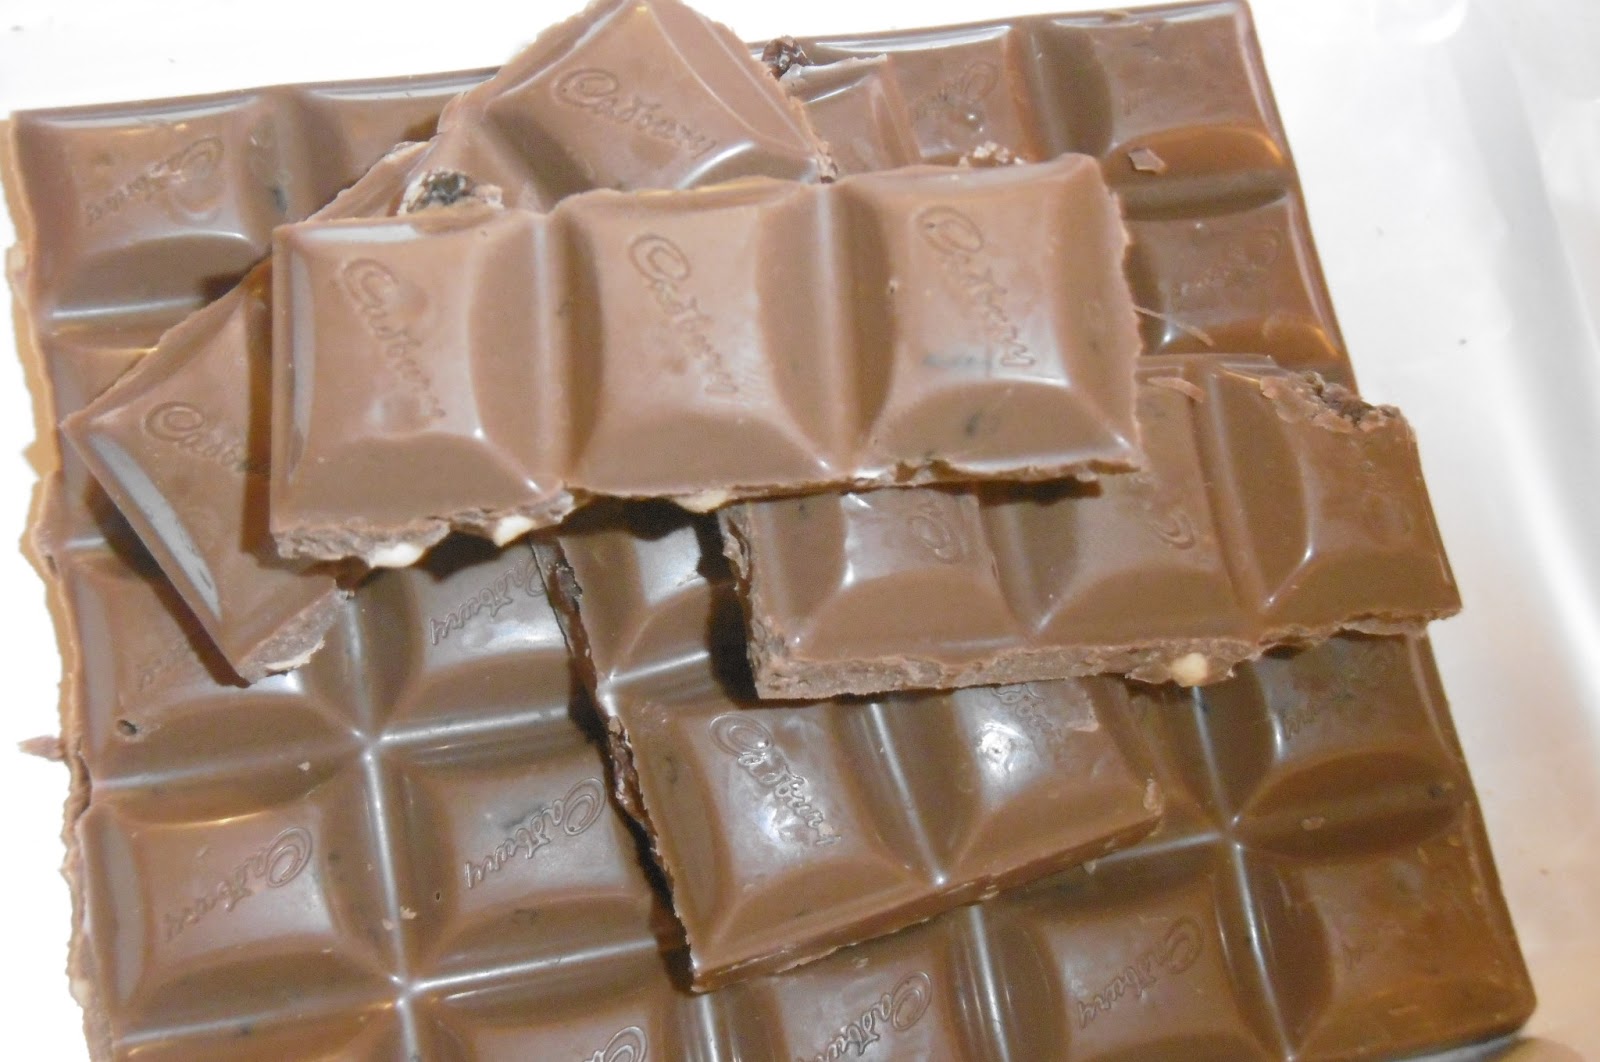 Madhouse Family Reviews: Cadbury Dairy Milk Tiffin review